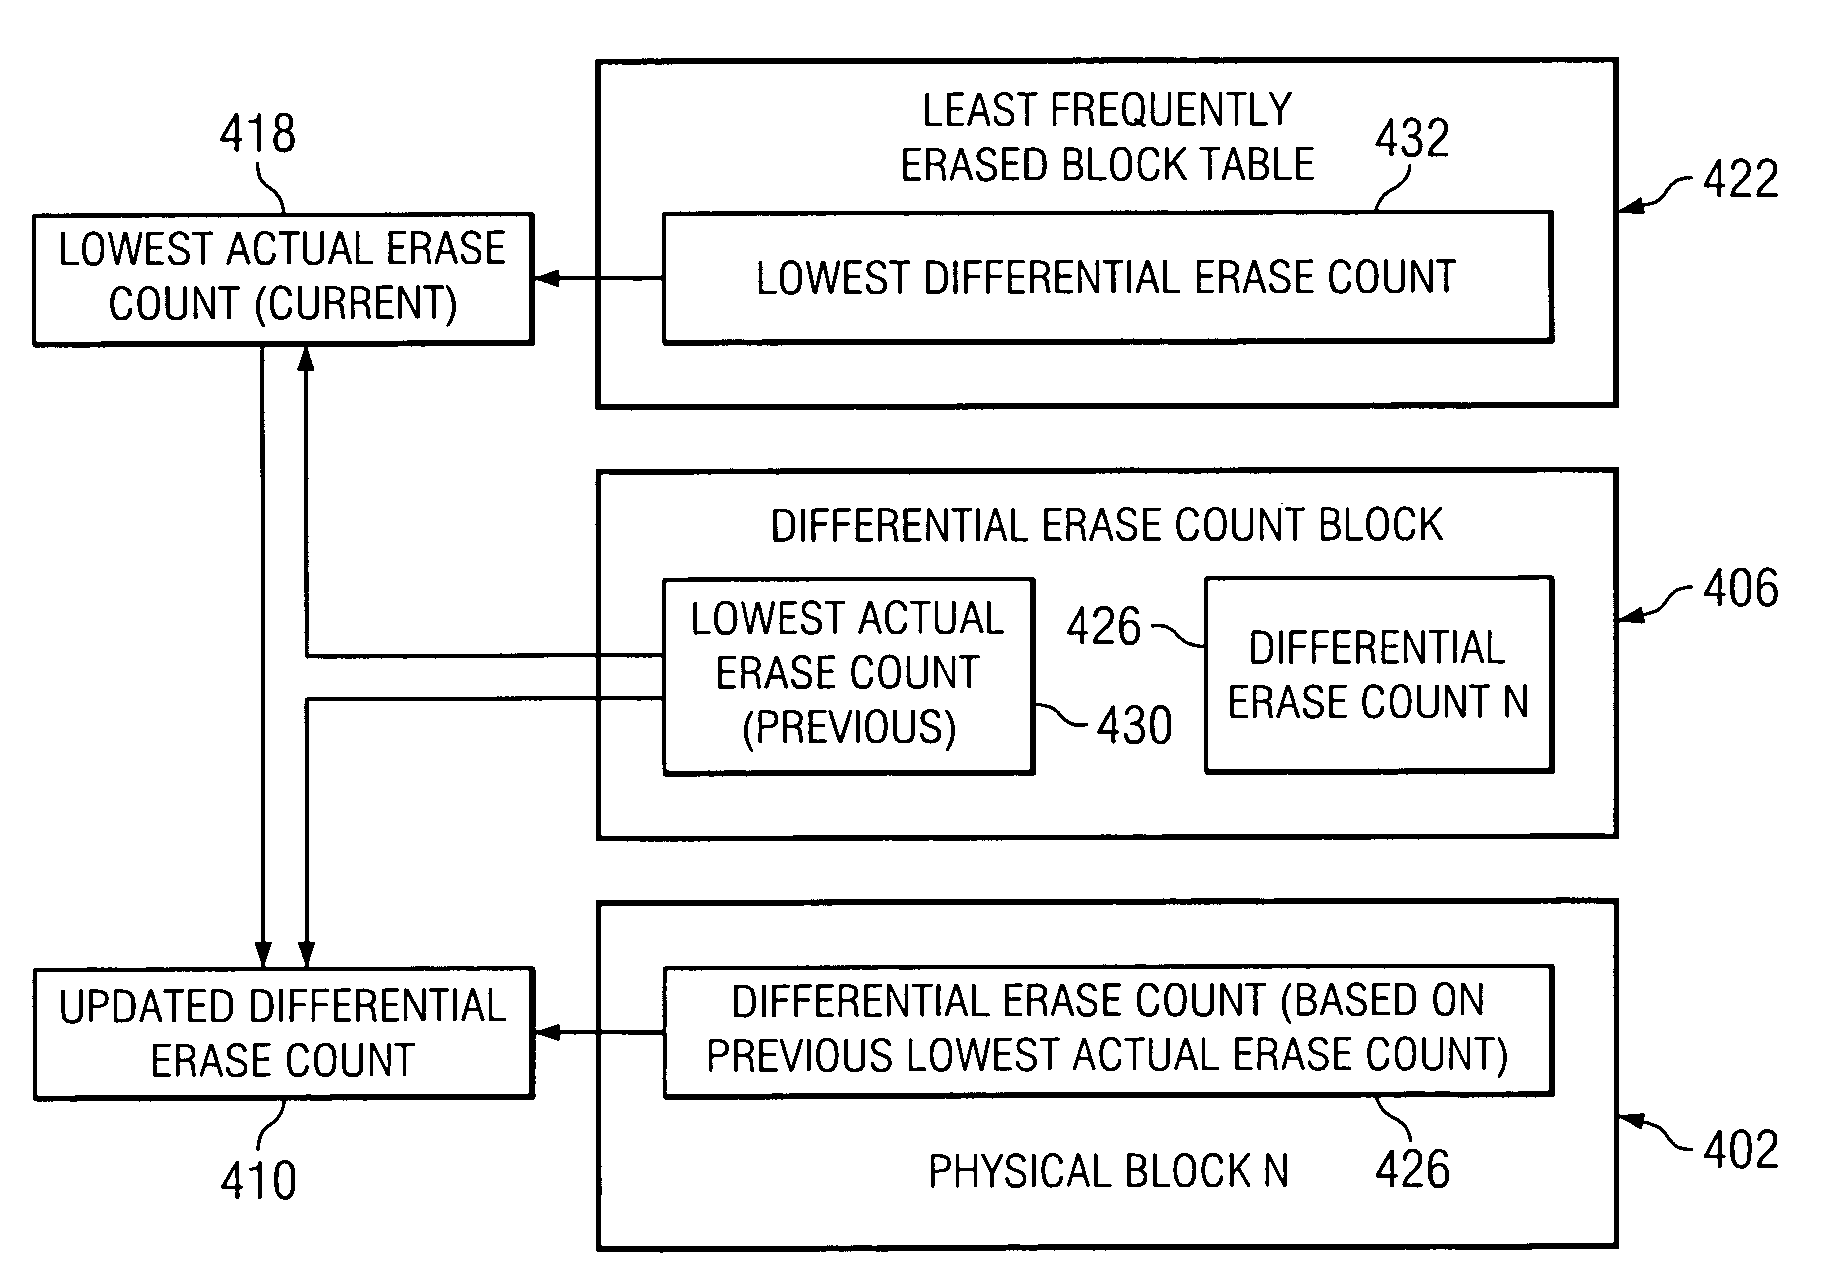 Erase count differential table within a non-volatile memory system